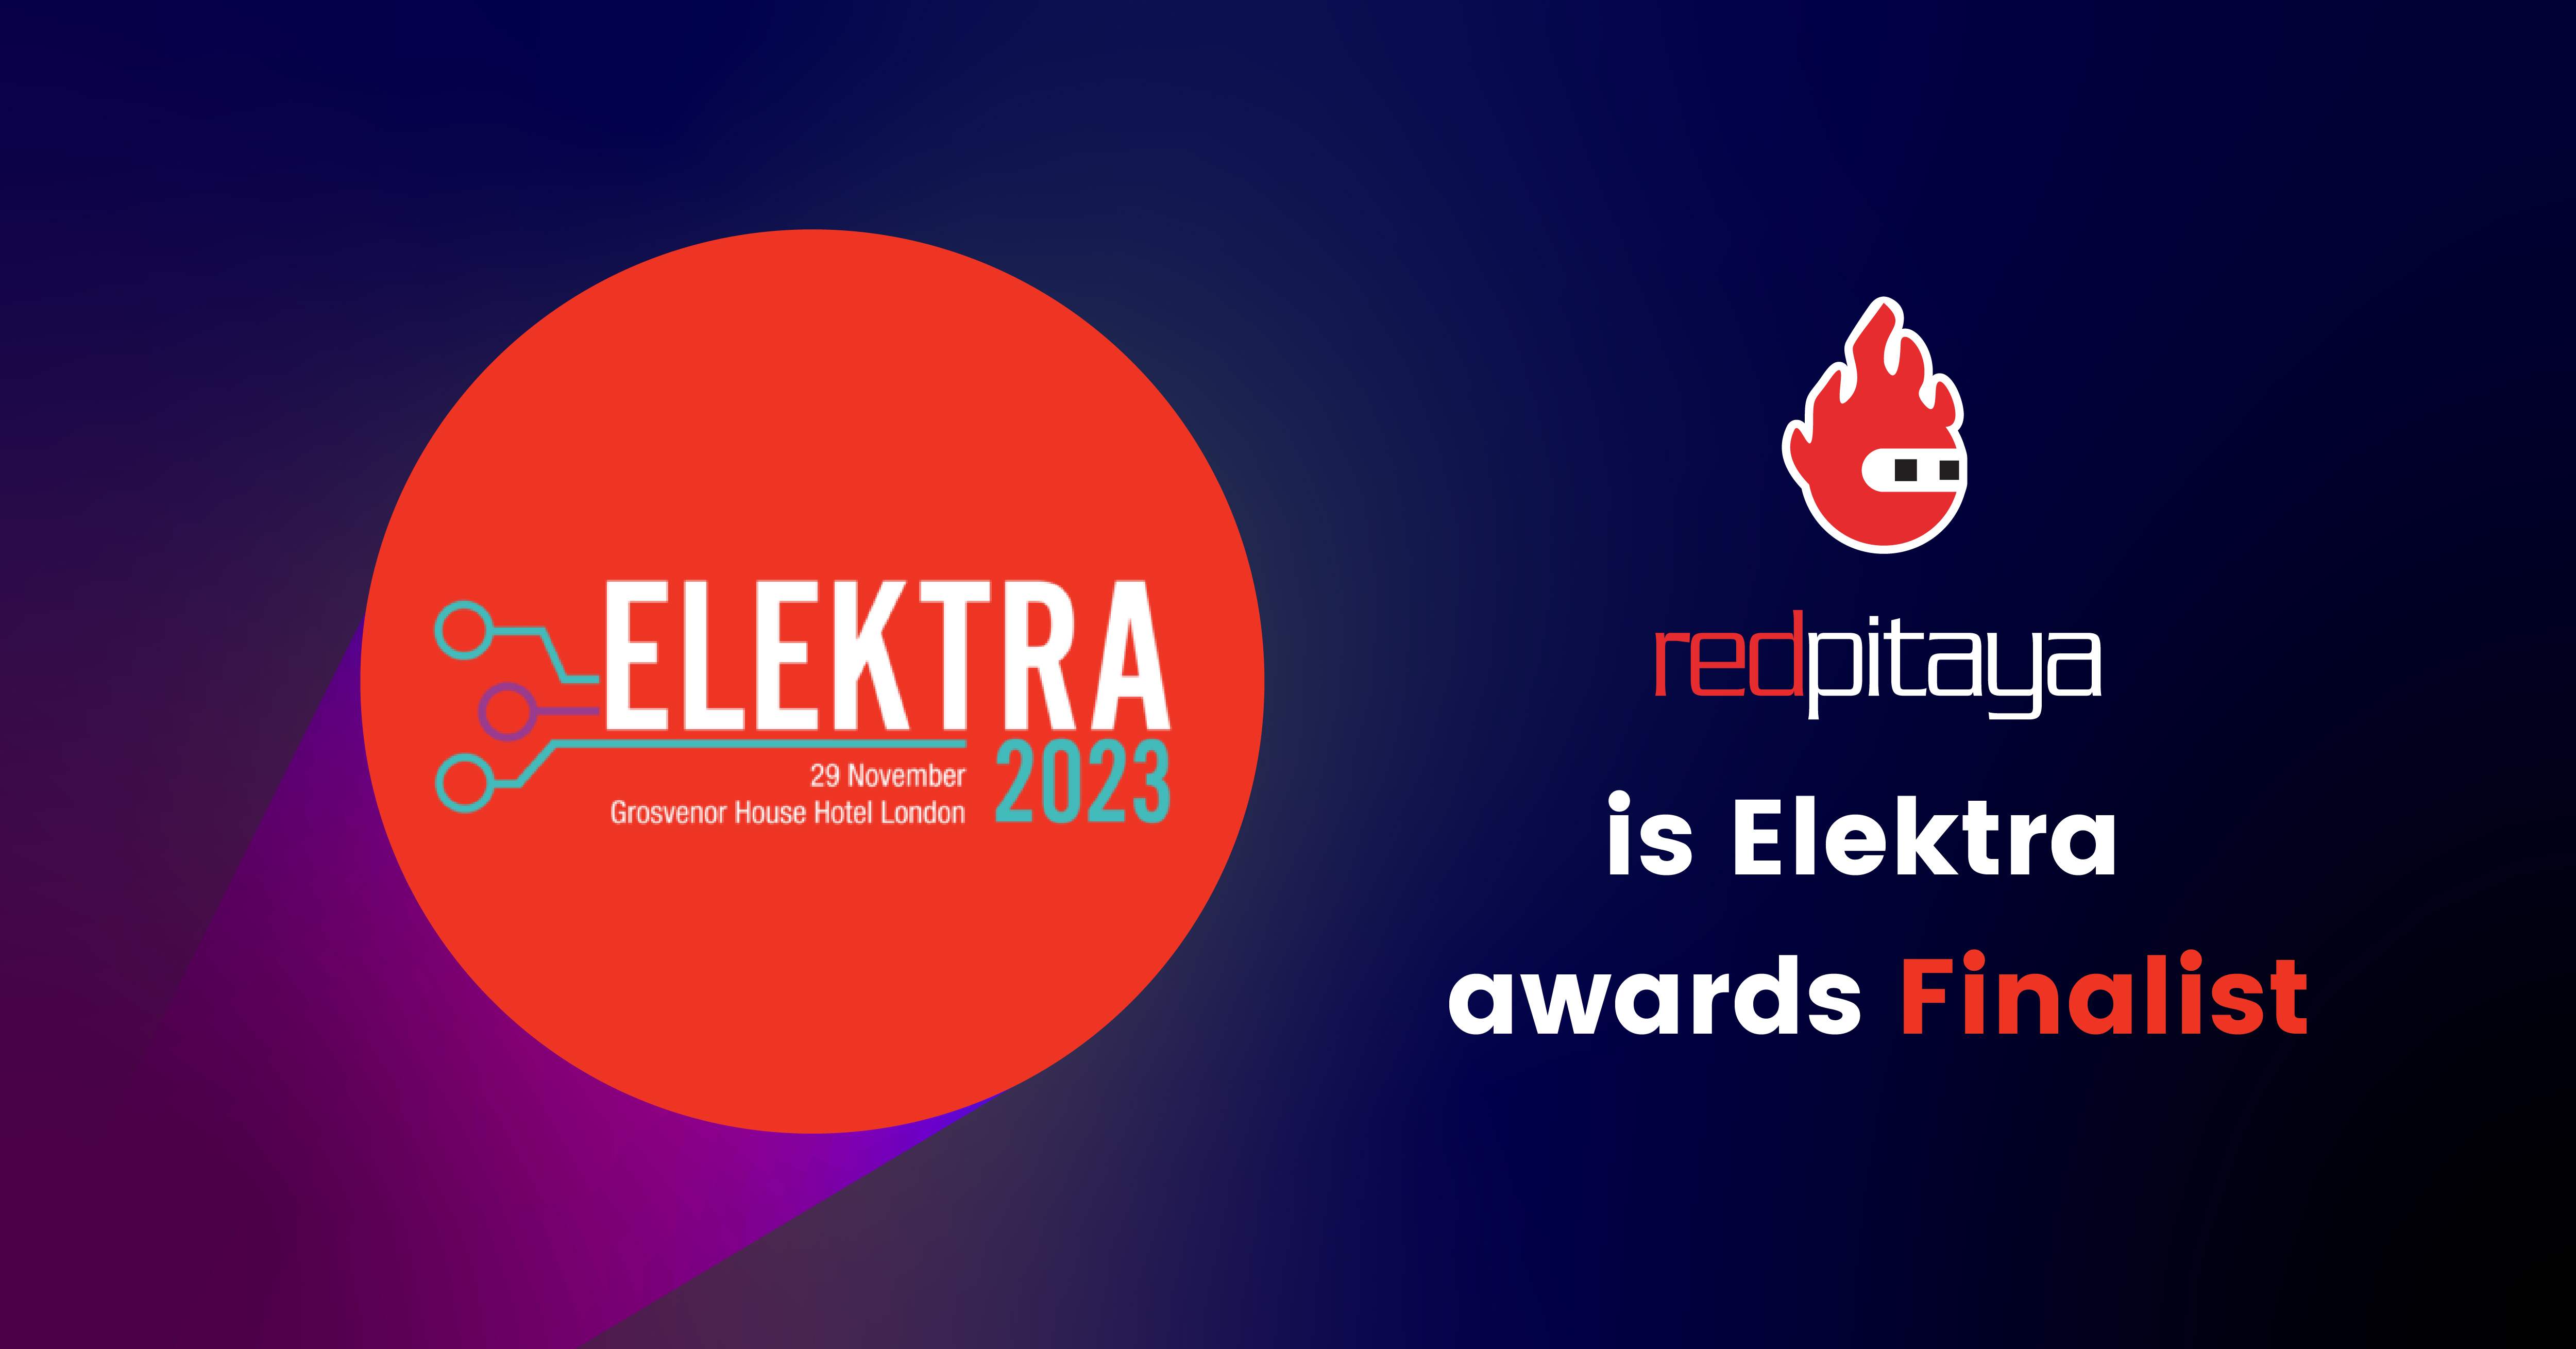 We are finalists in the Elektra Awards 2023